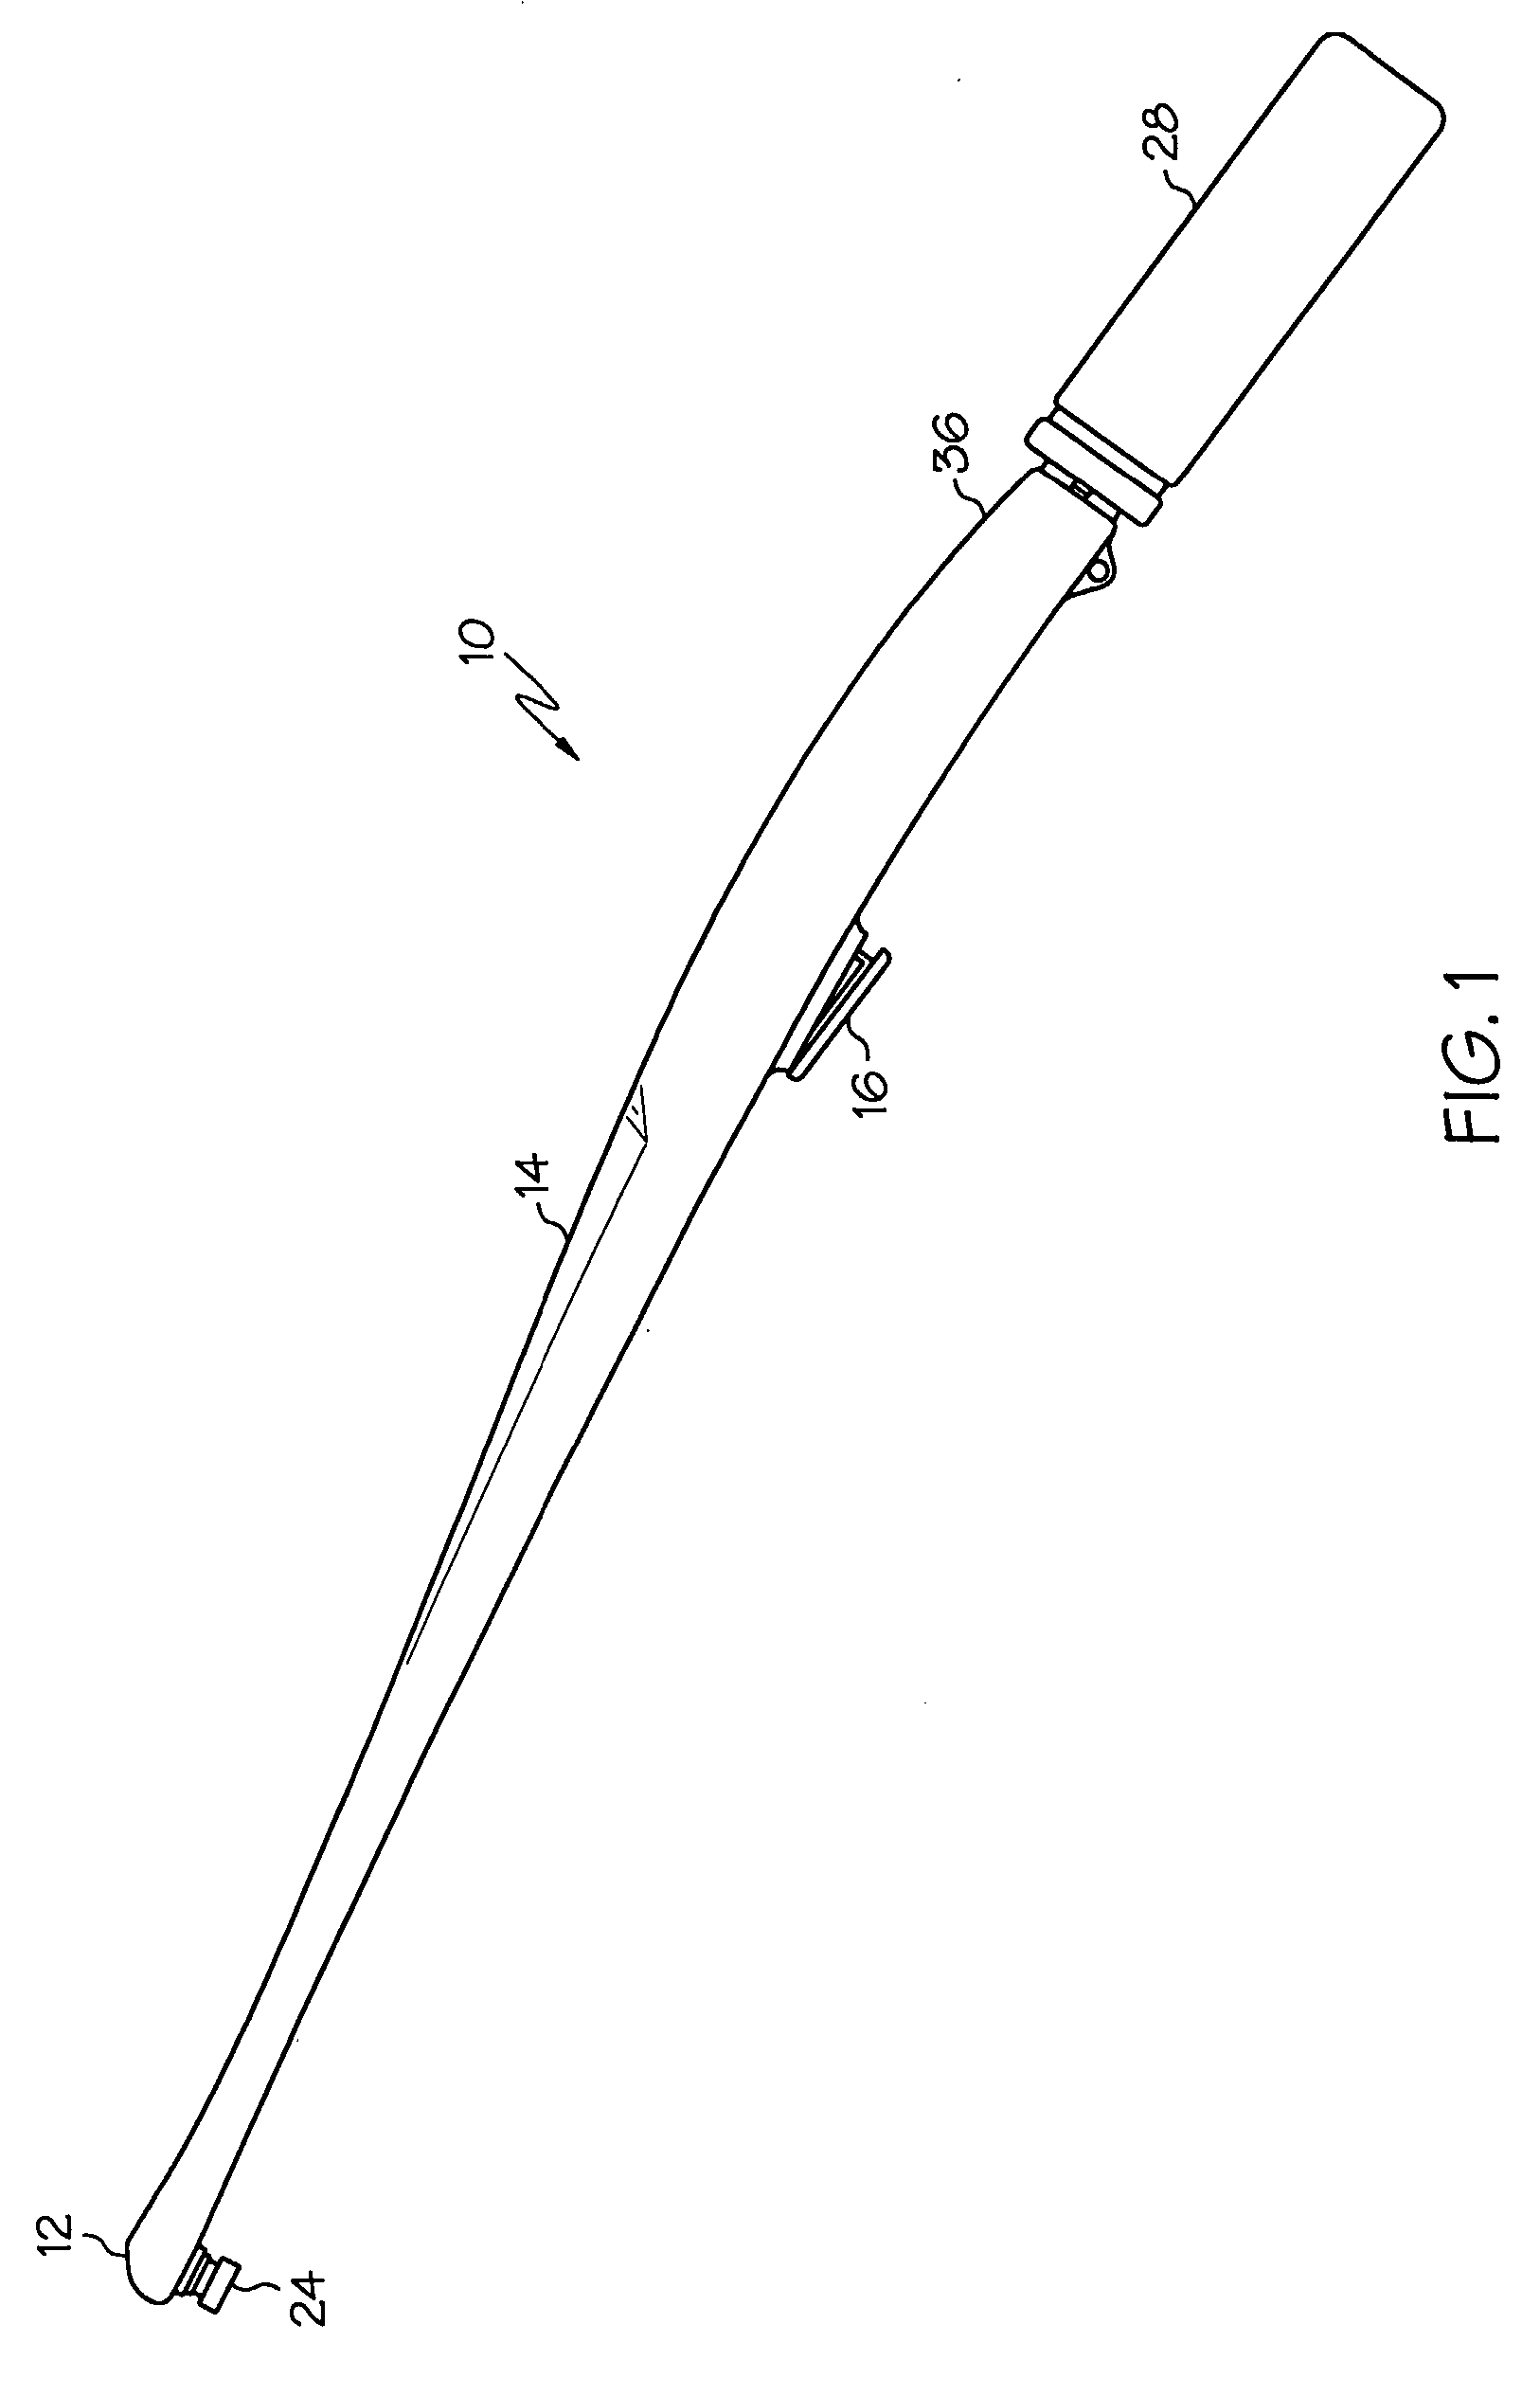 Spray Tanning Delivery Device